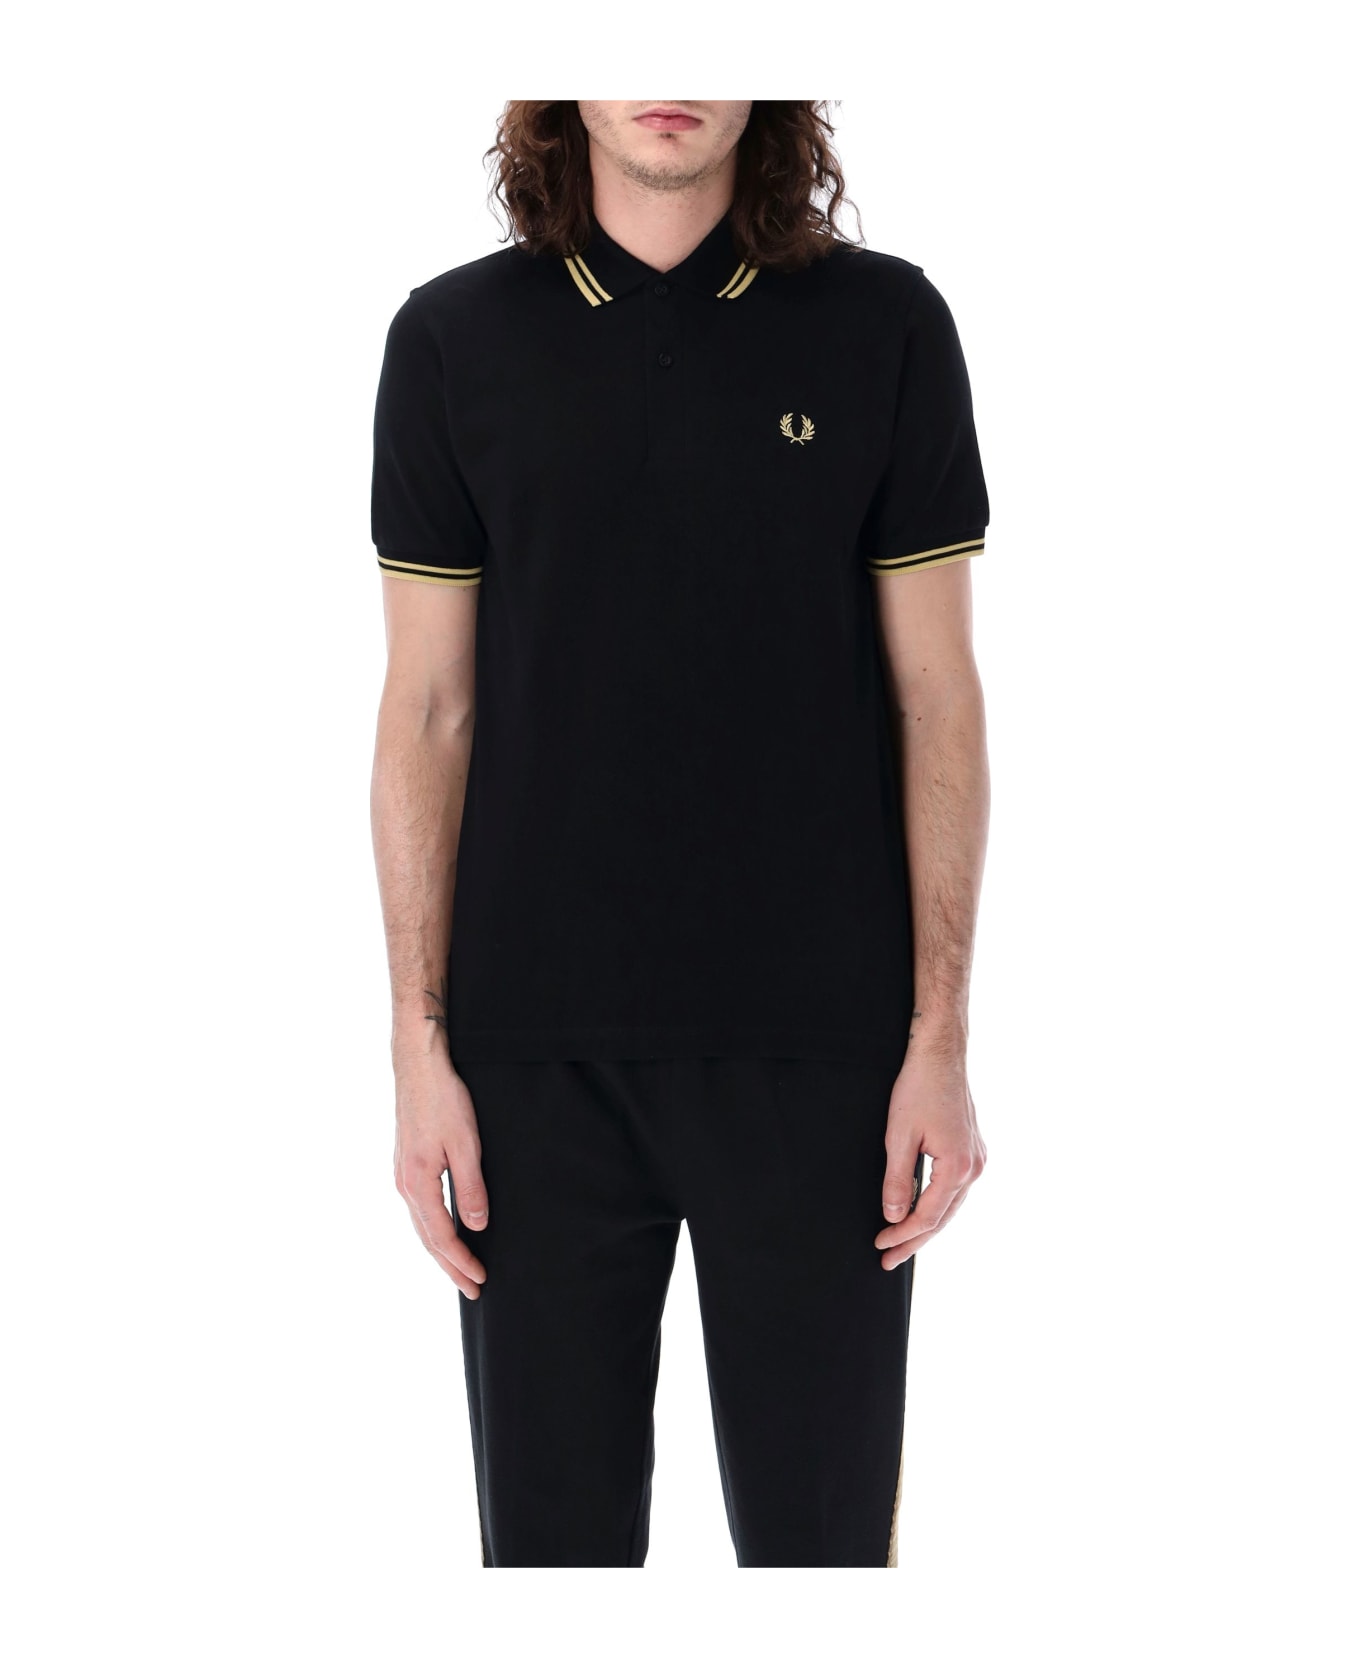 Fred Perry The Original Twin Tipped Piqué Polo Shirt - BLACK CHAMPAGNE ポロシャツ